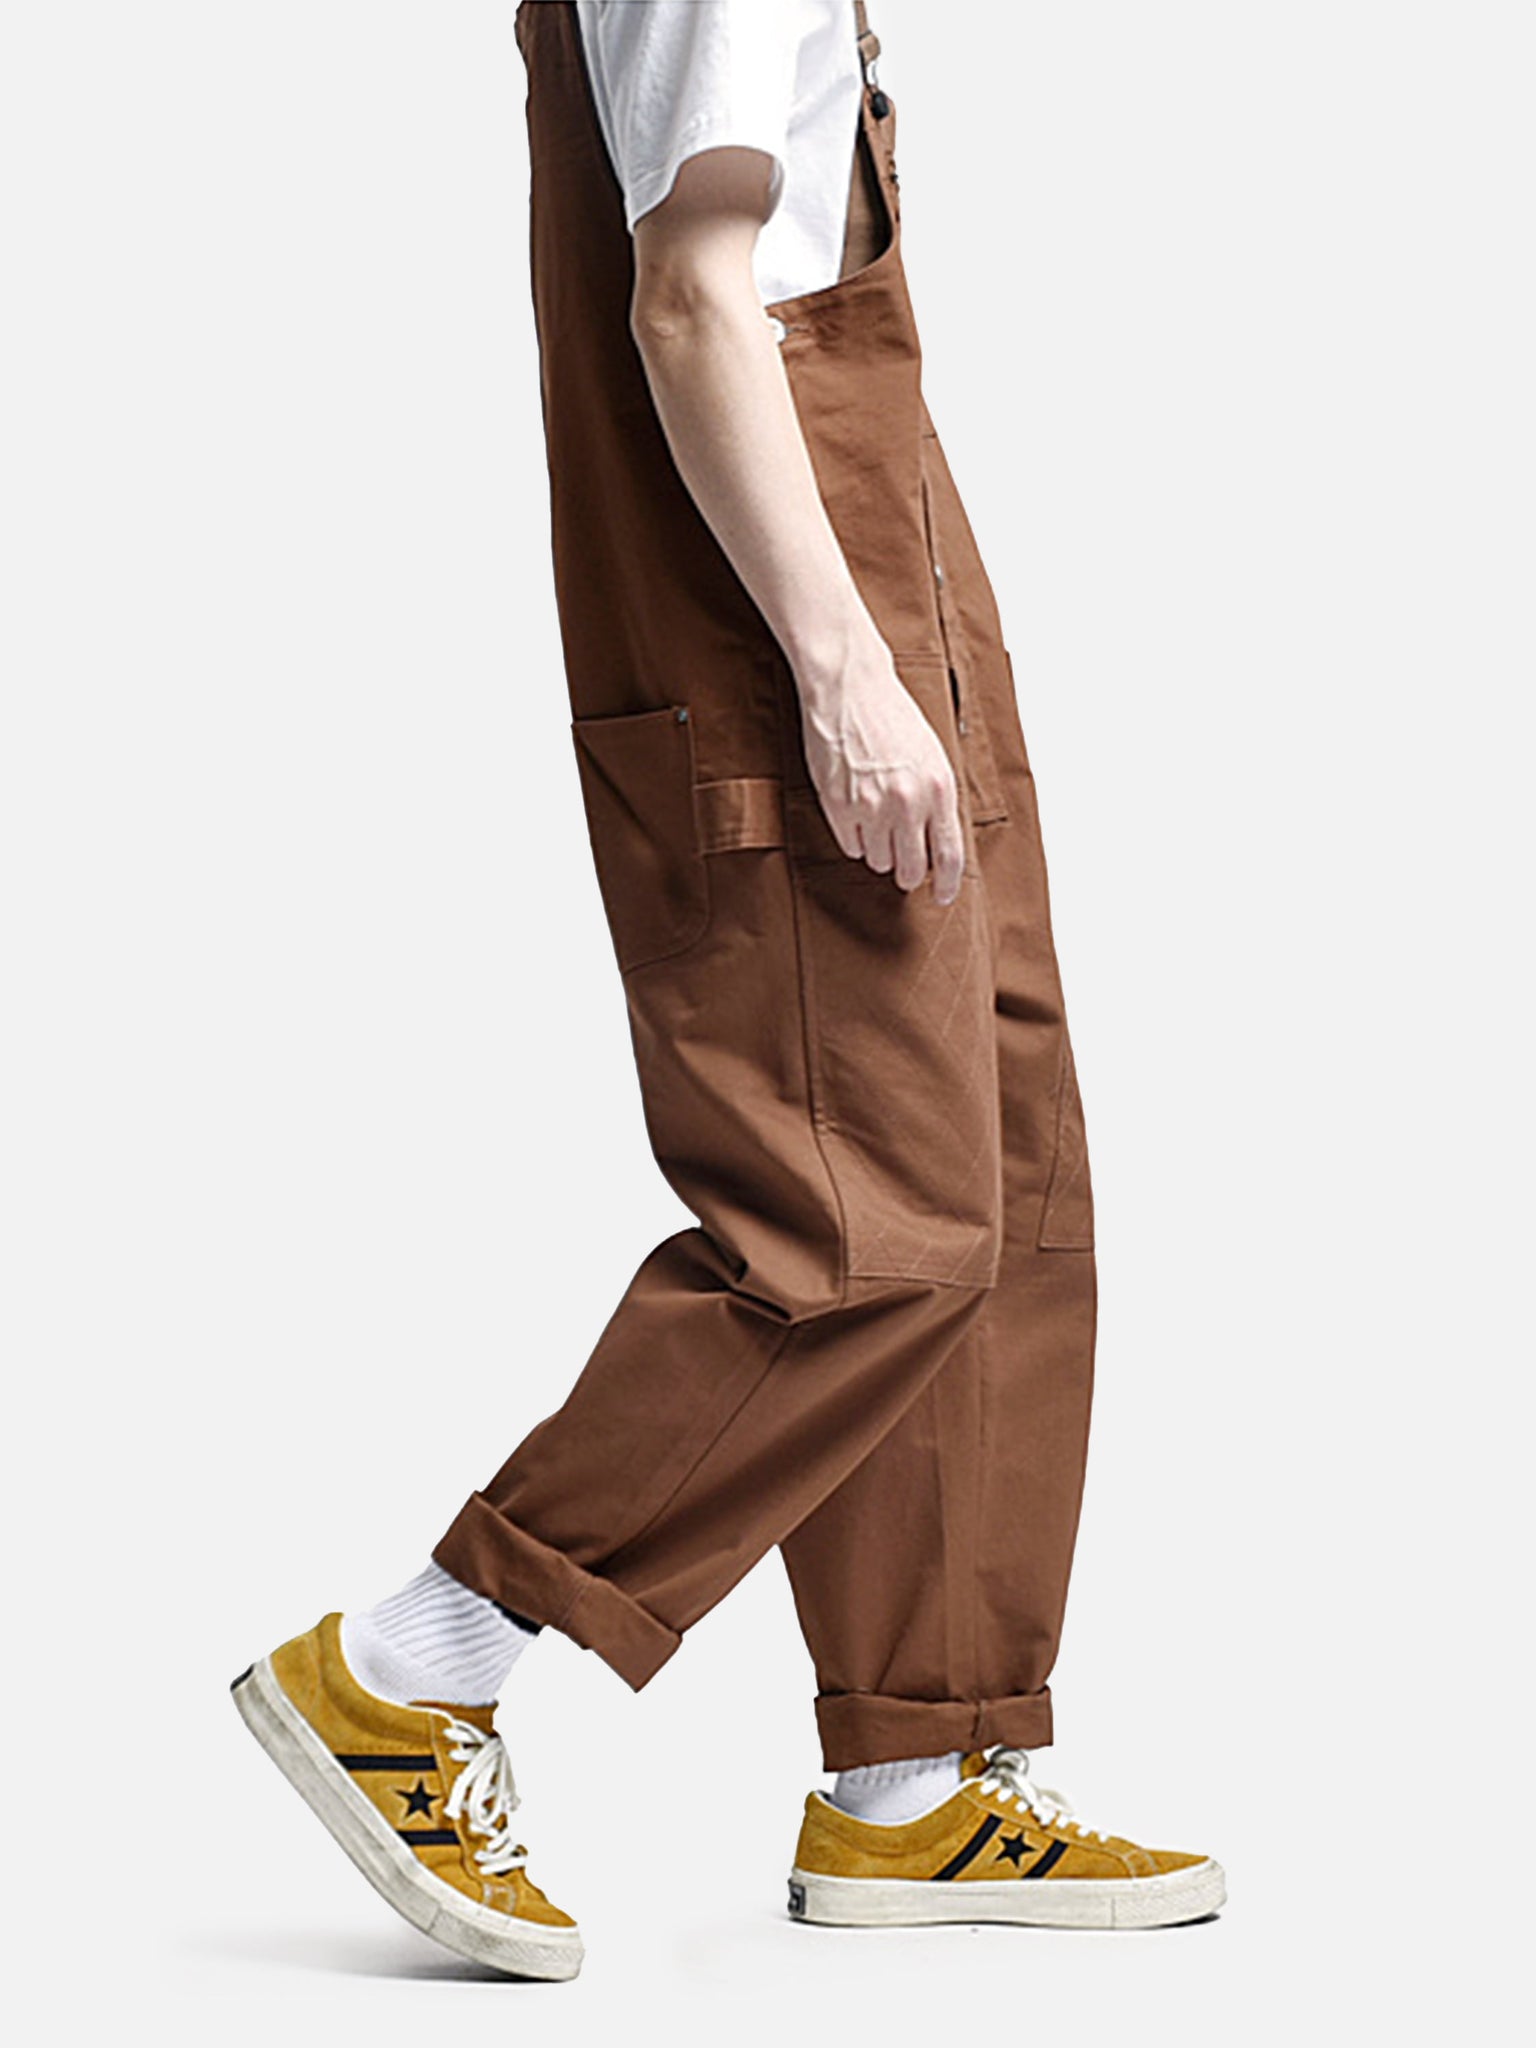 The Supermade Vintage Straight Men's Pants Overall -1248